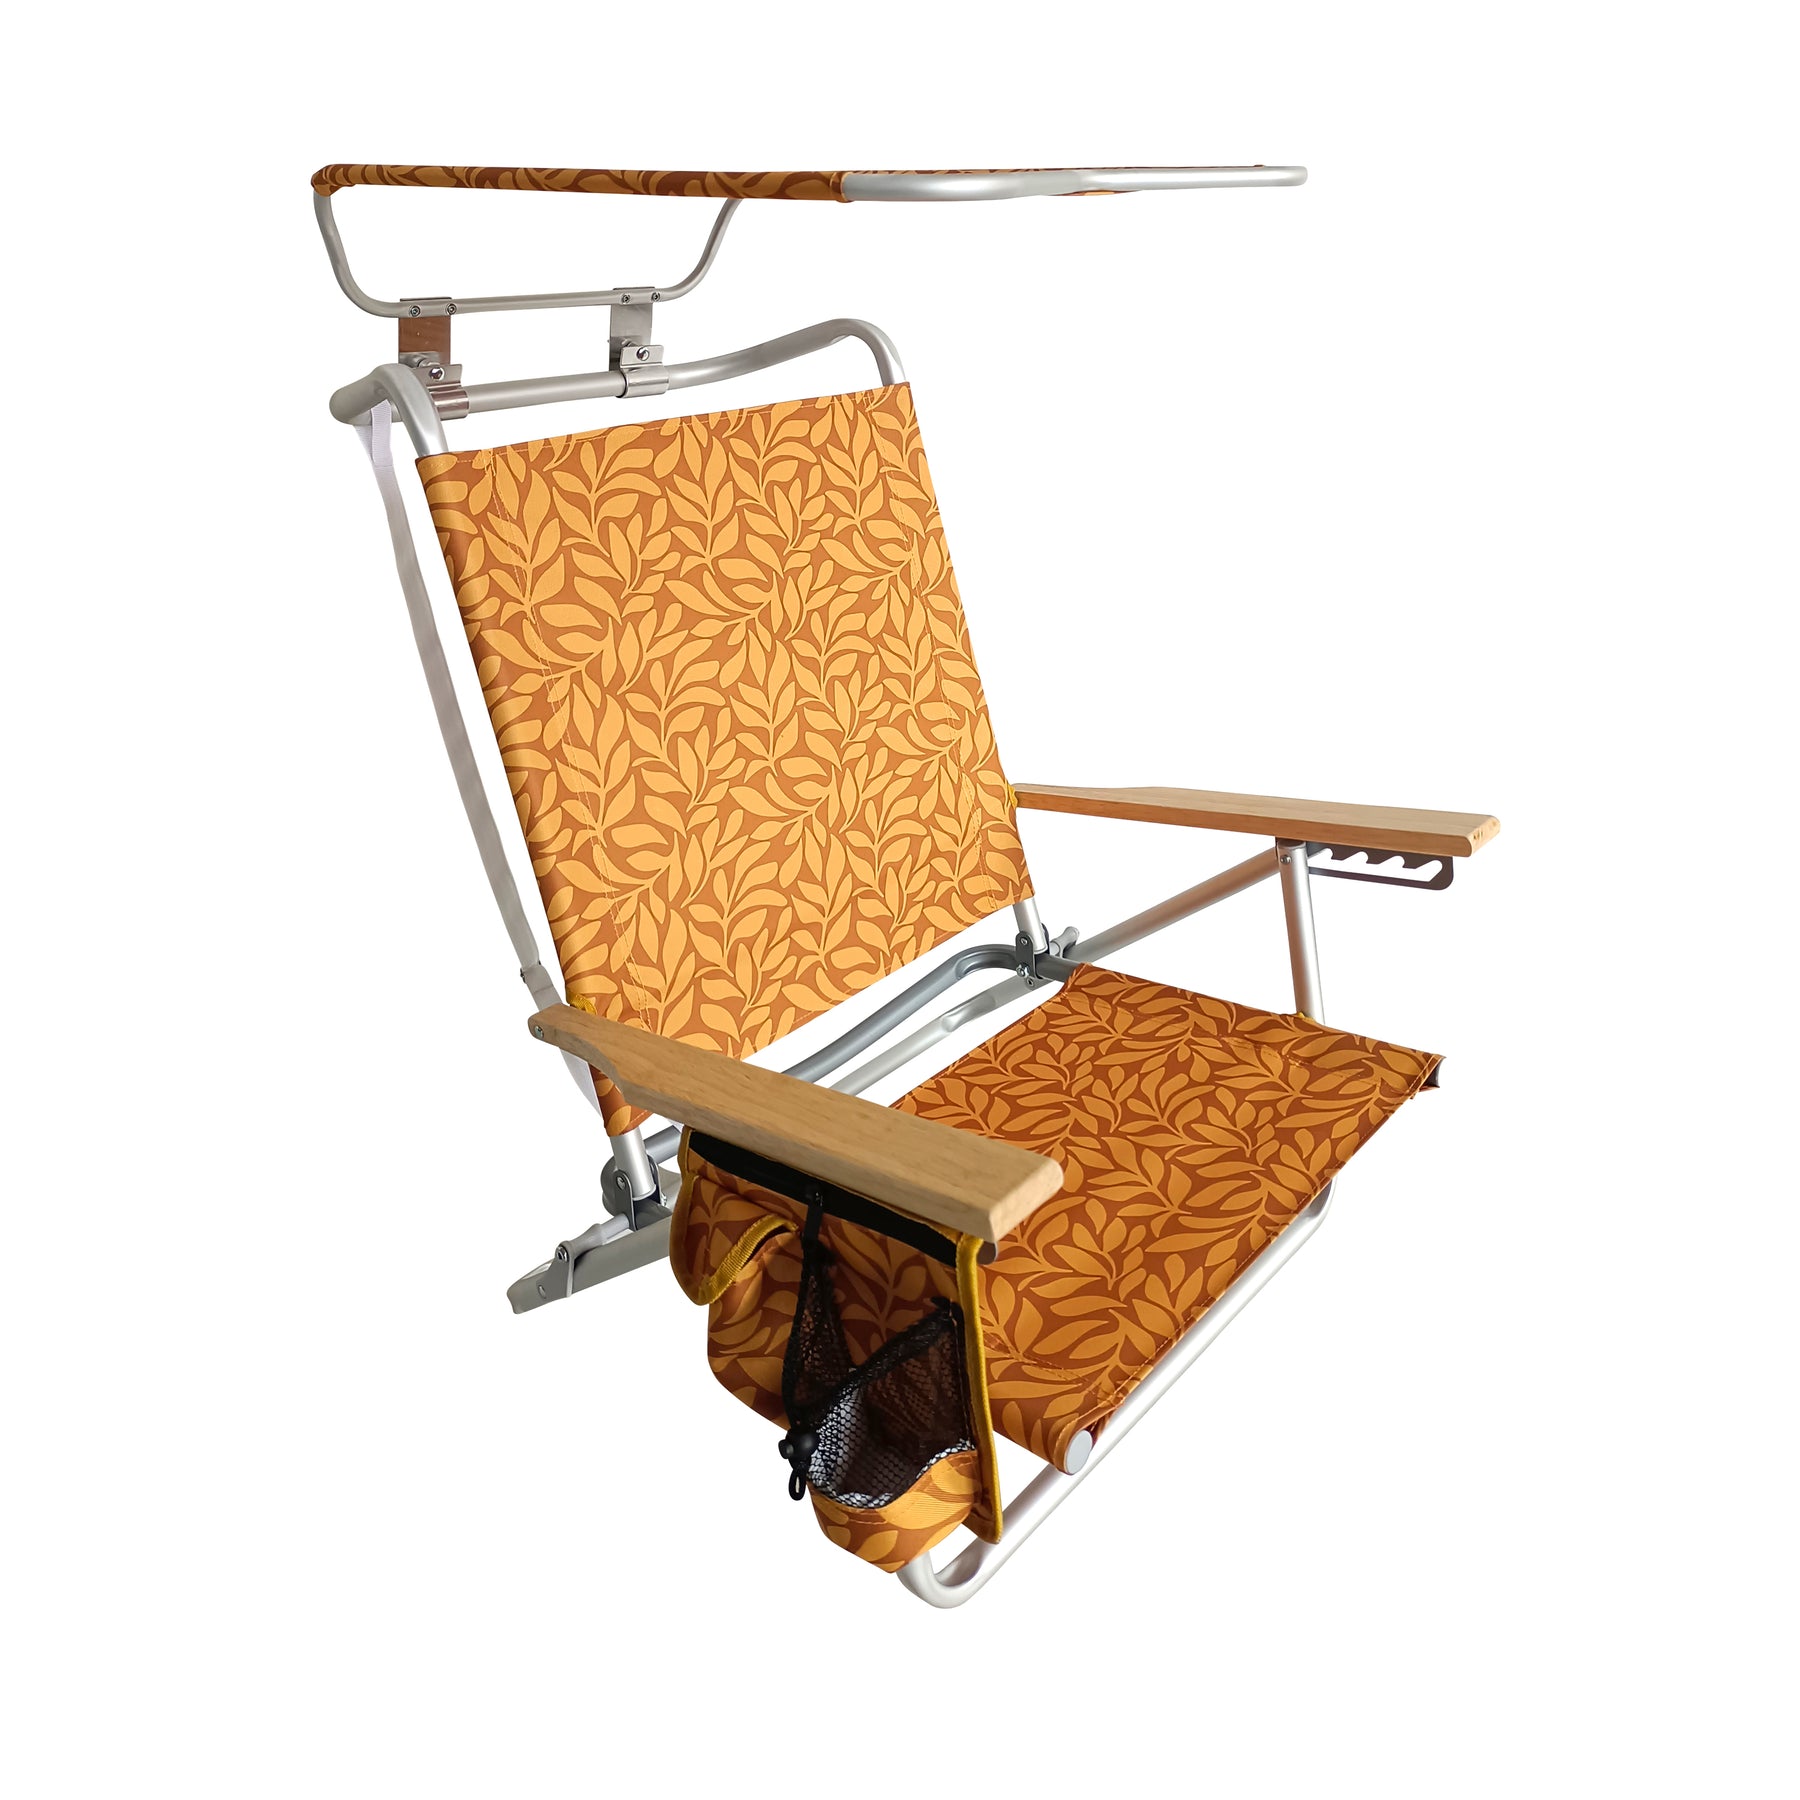 Bliss Hammocks Folding Beach Chair with Canopy, Storage Pouch, Phone Holder, Cup Holder, and Shoulder Straps in the amber leaf variation.